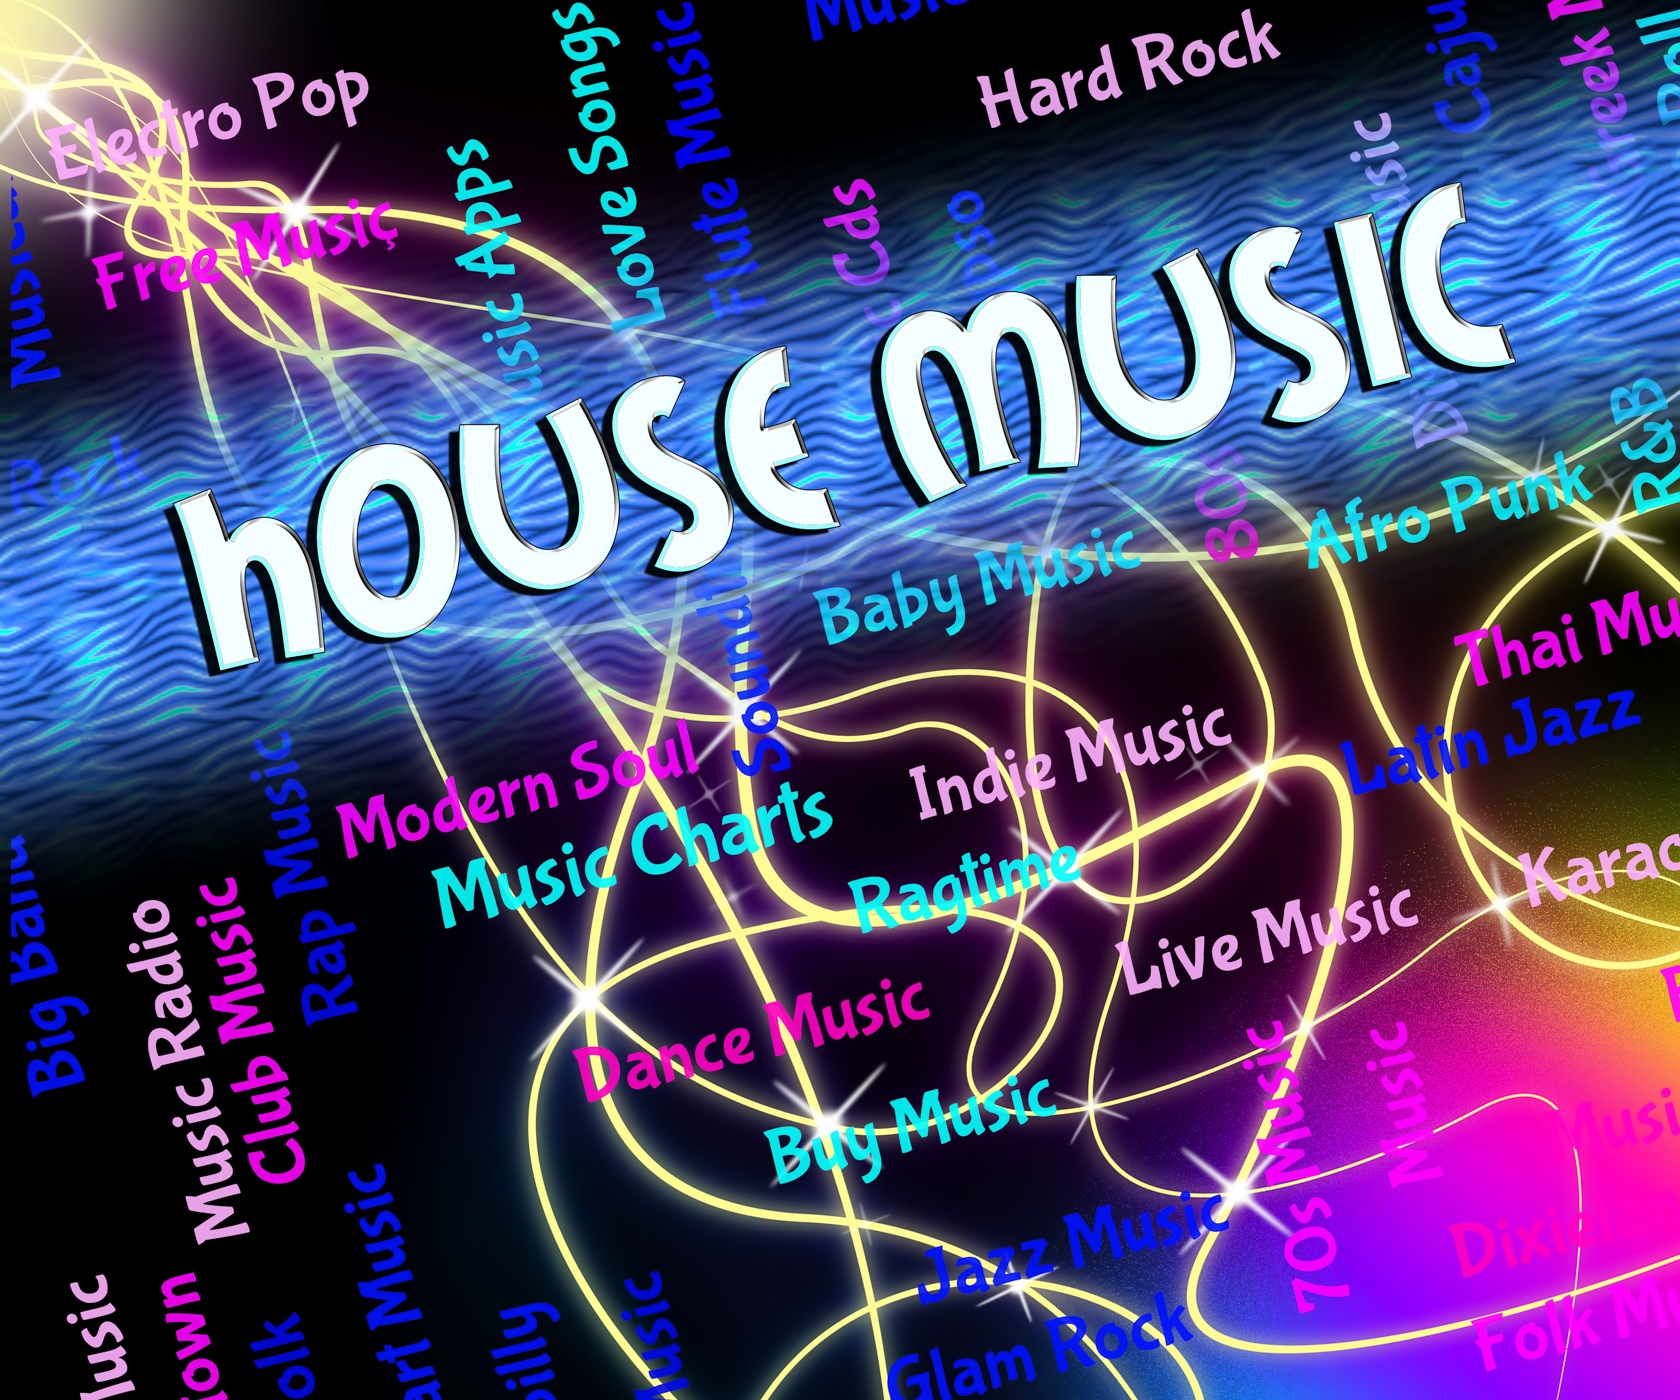 House music represents sound tracks and acoustic photo